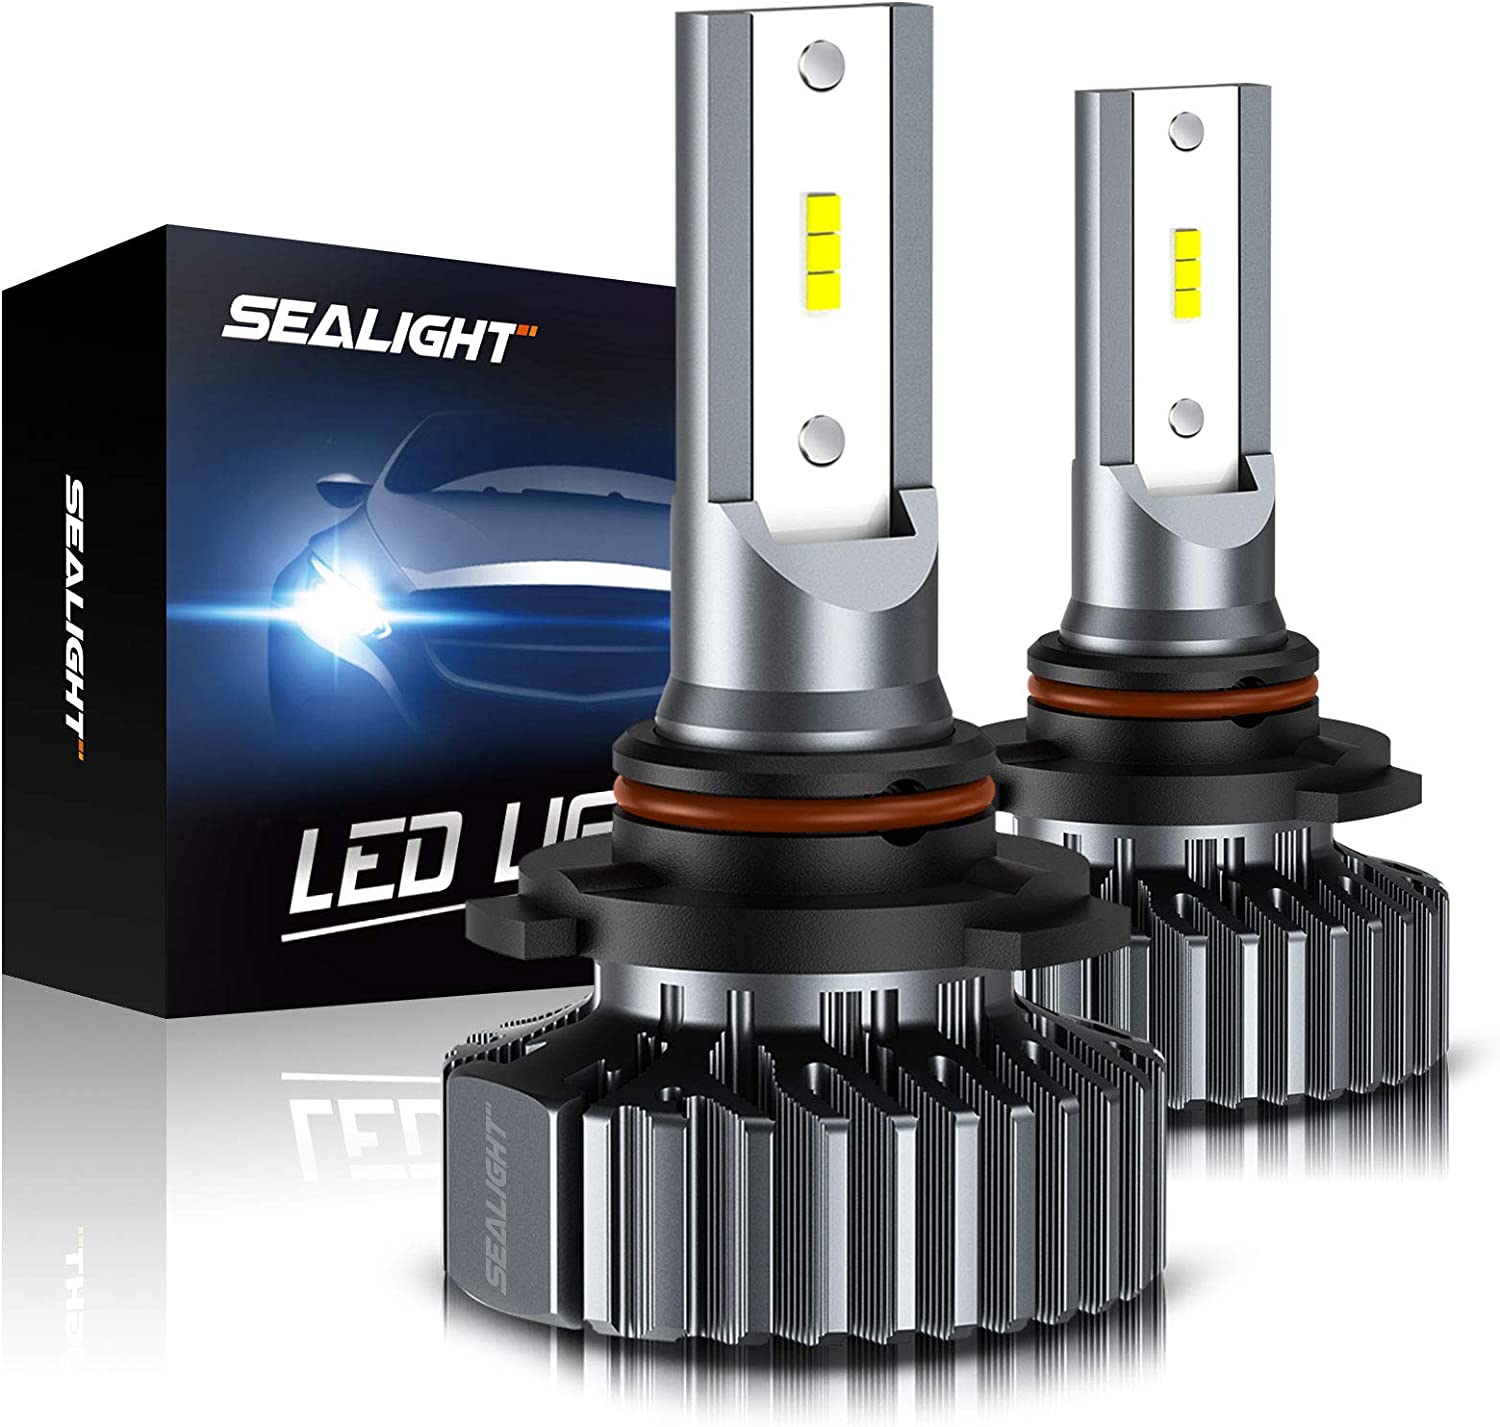 Image of our recommended LED Headlight by Sealight